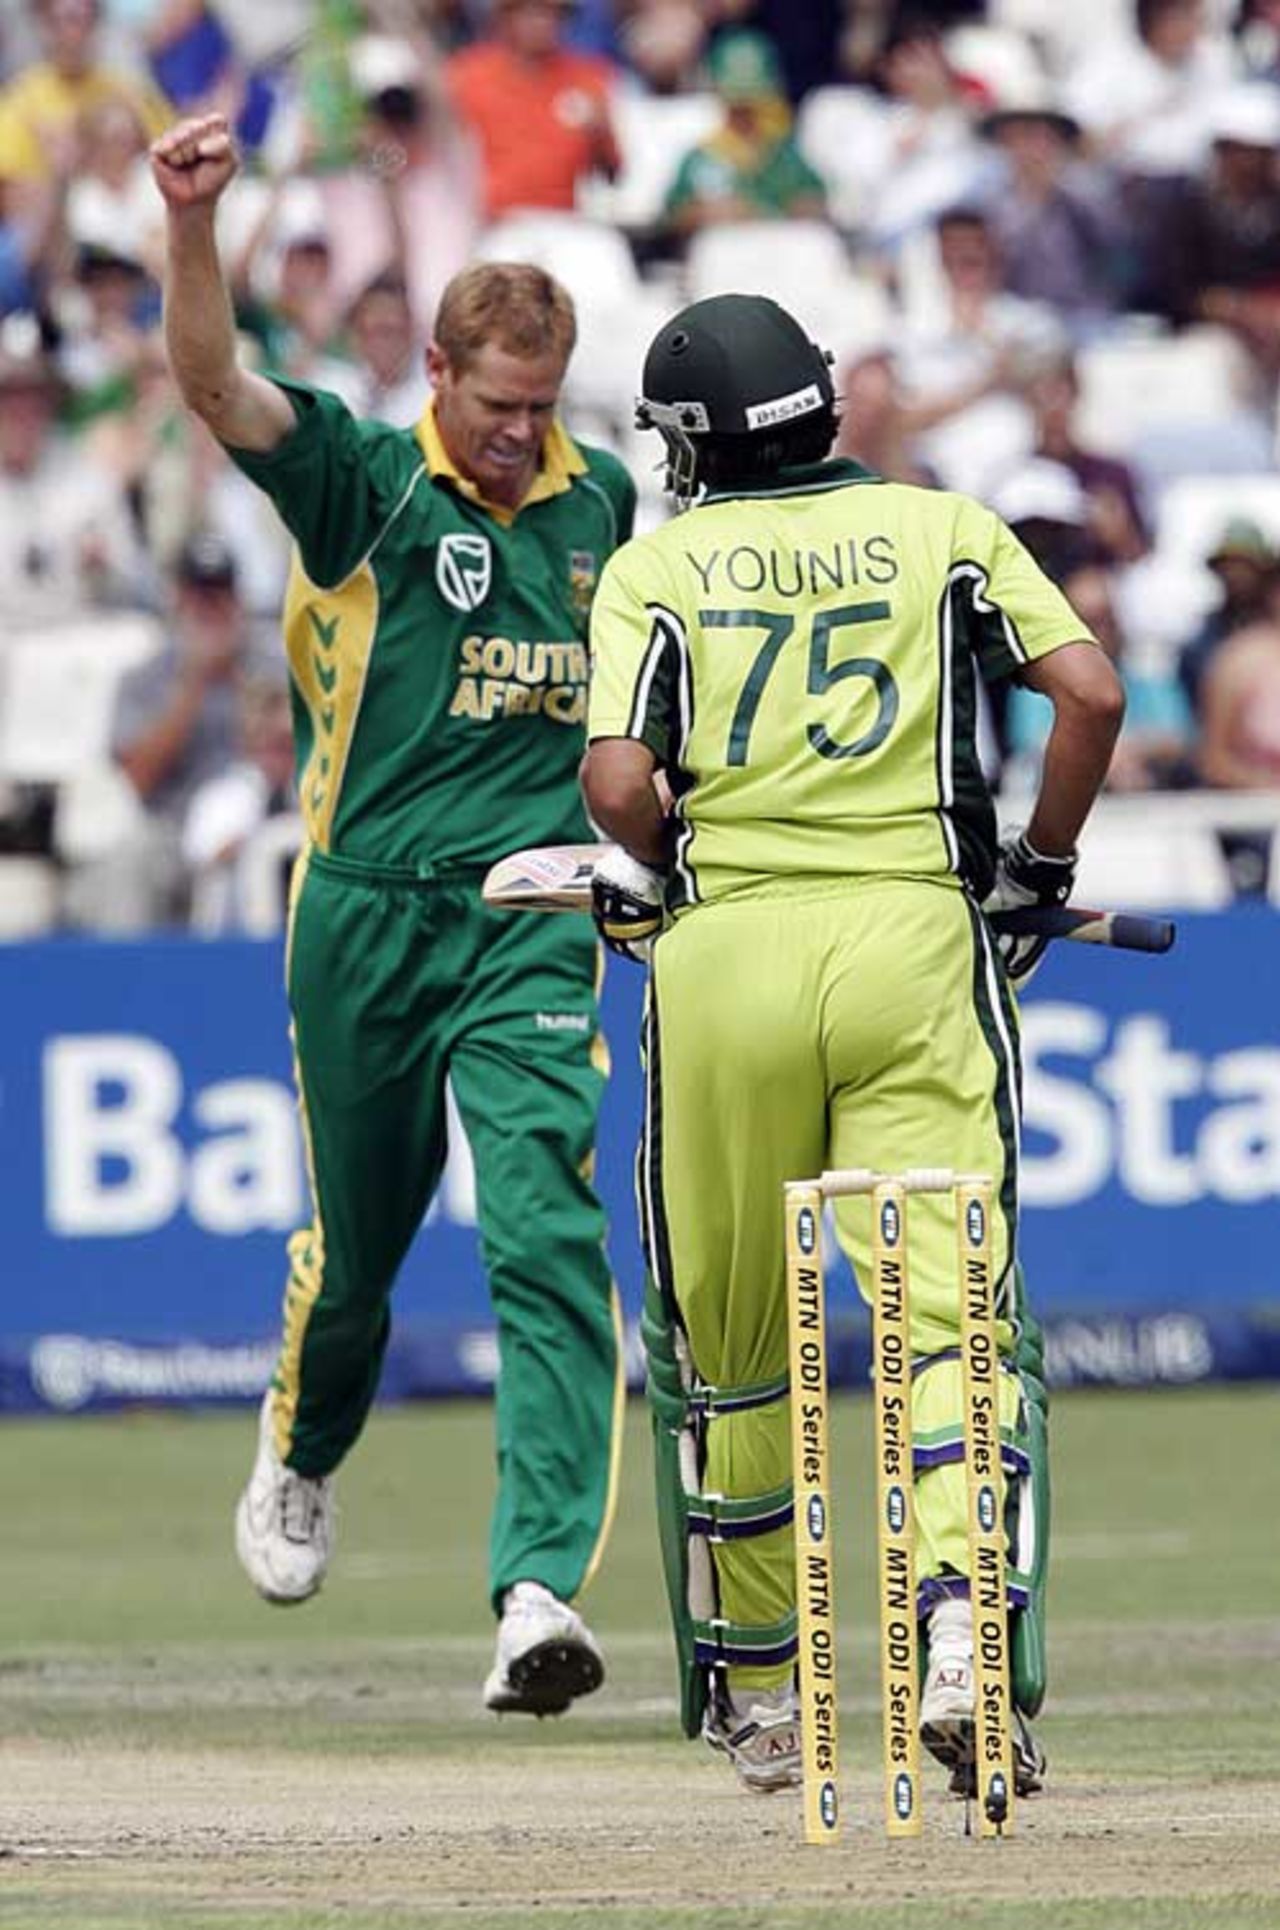 Younis Khan was also a victim for Shaun Pollock's tight first spell, South Africa v Pakistan, 4th ODI, Cape Town, February 11, 2007